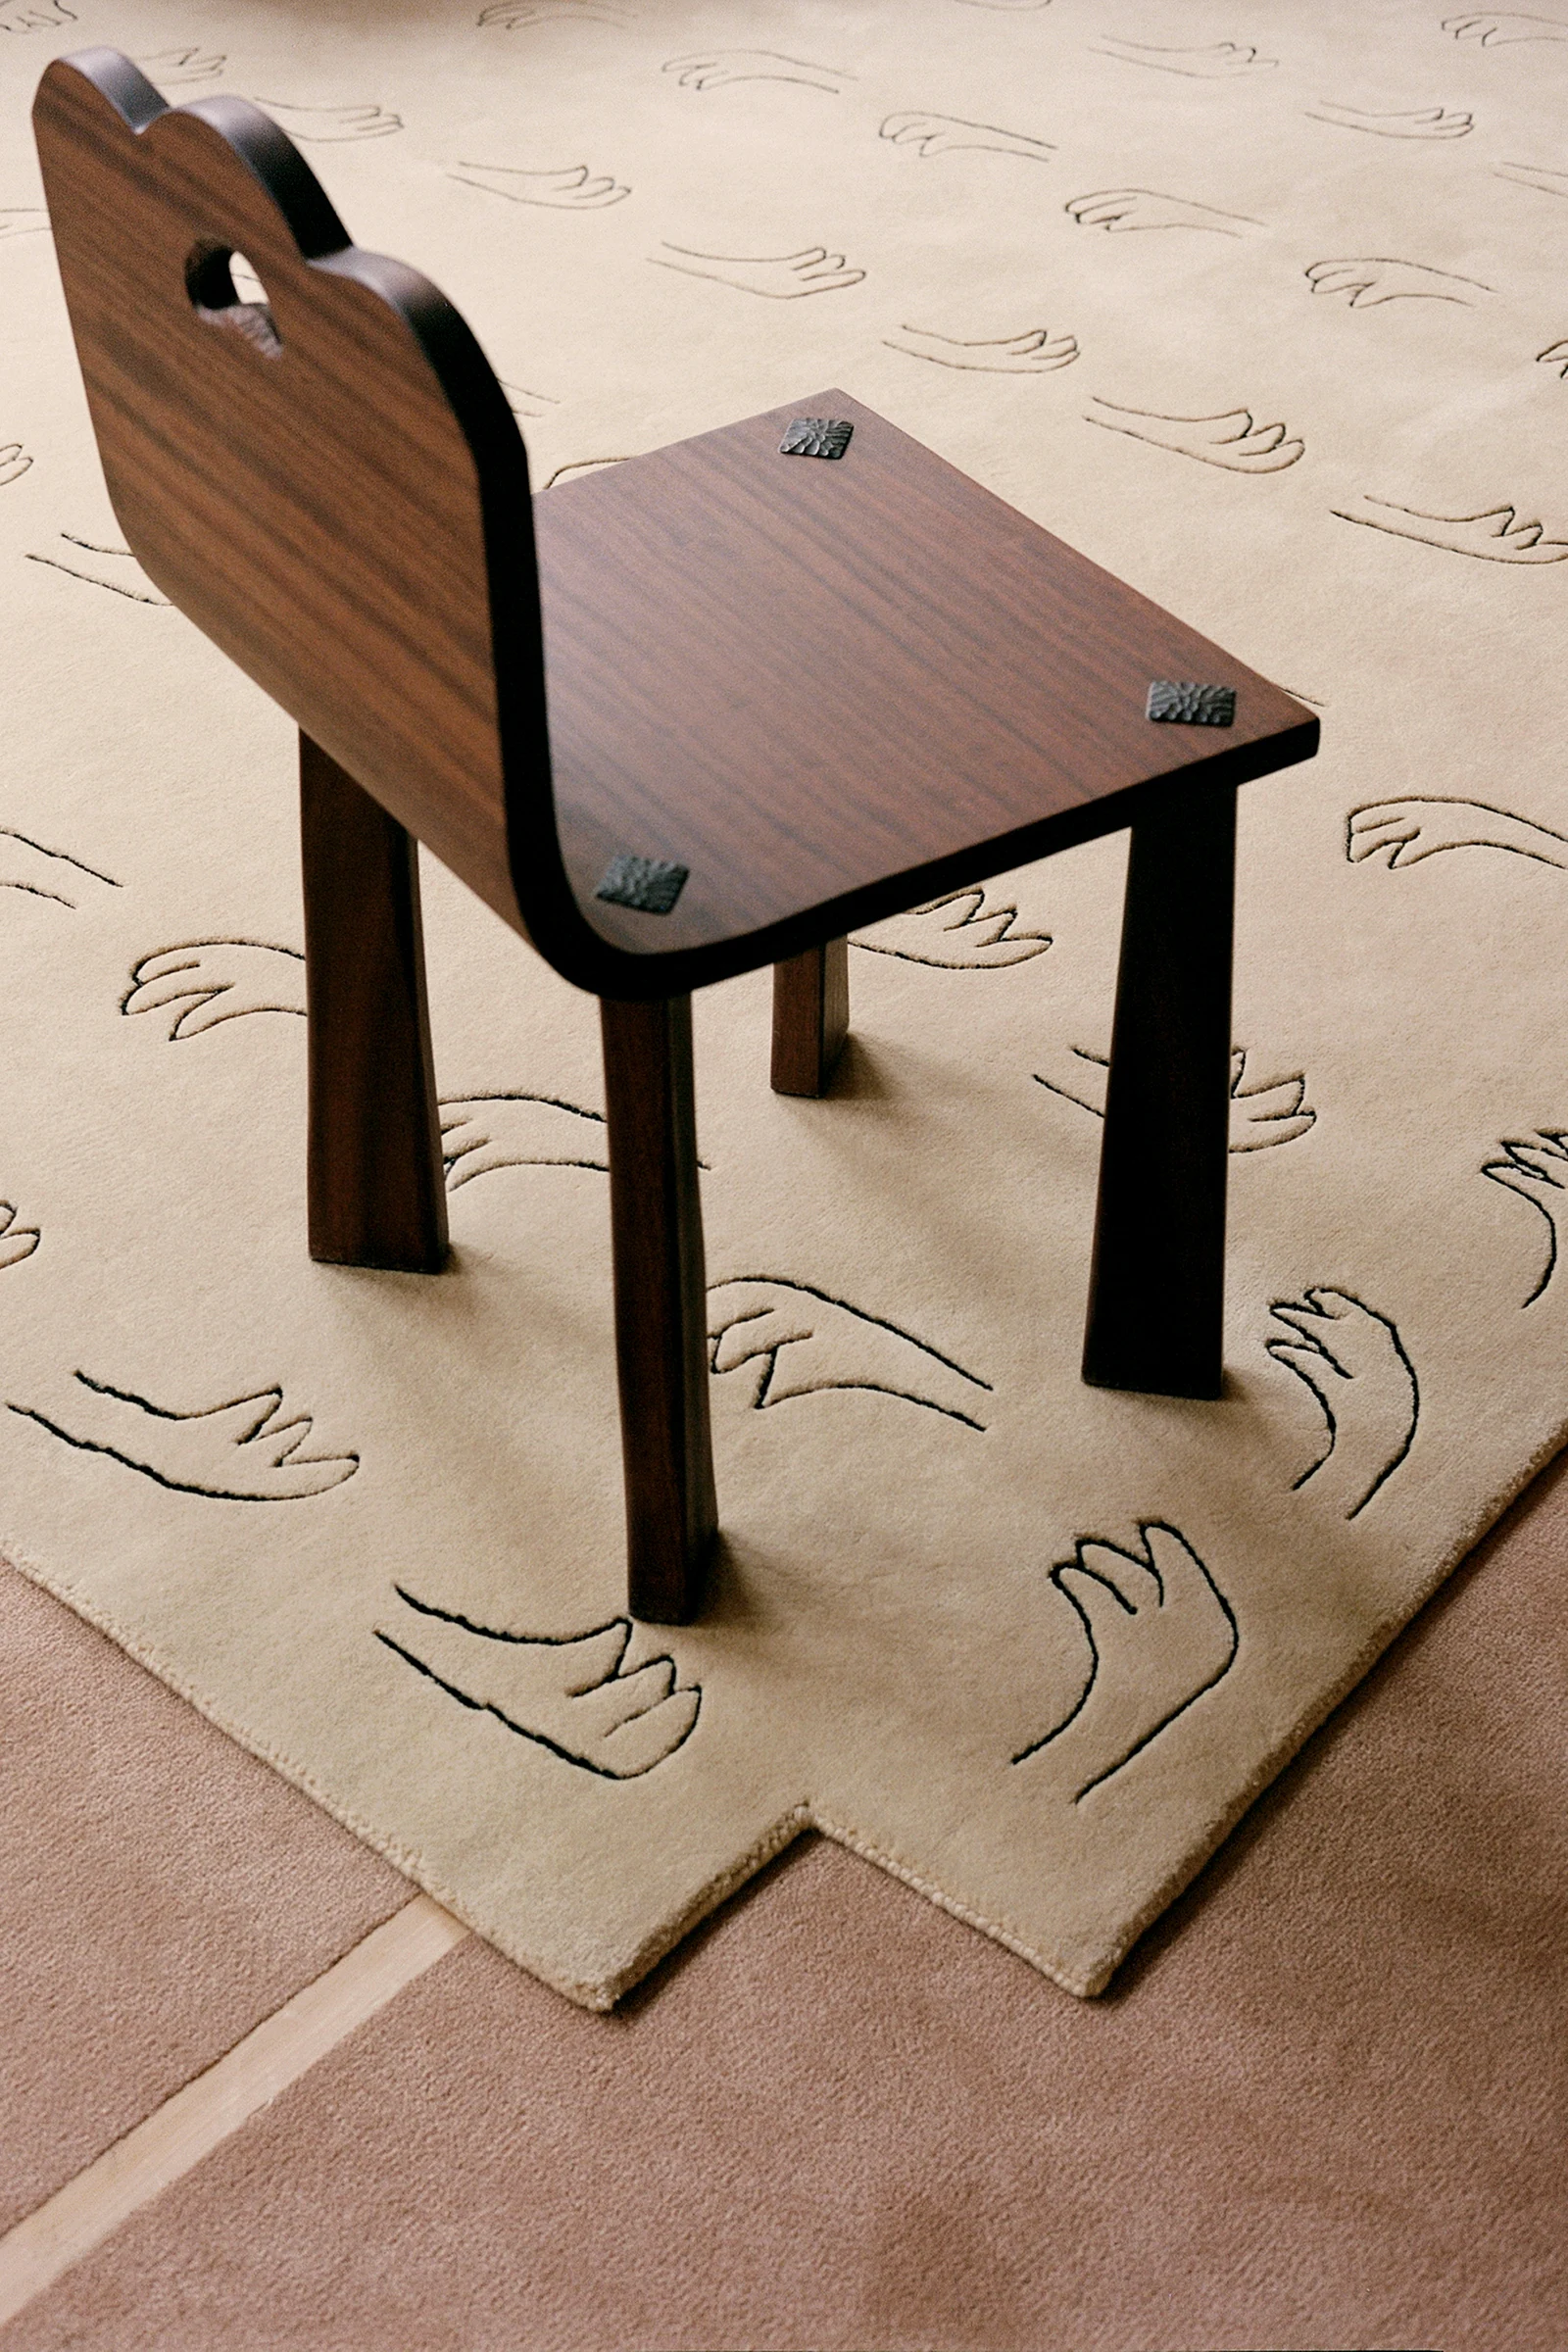 a wooden bench sitting on top of a rug